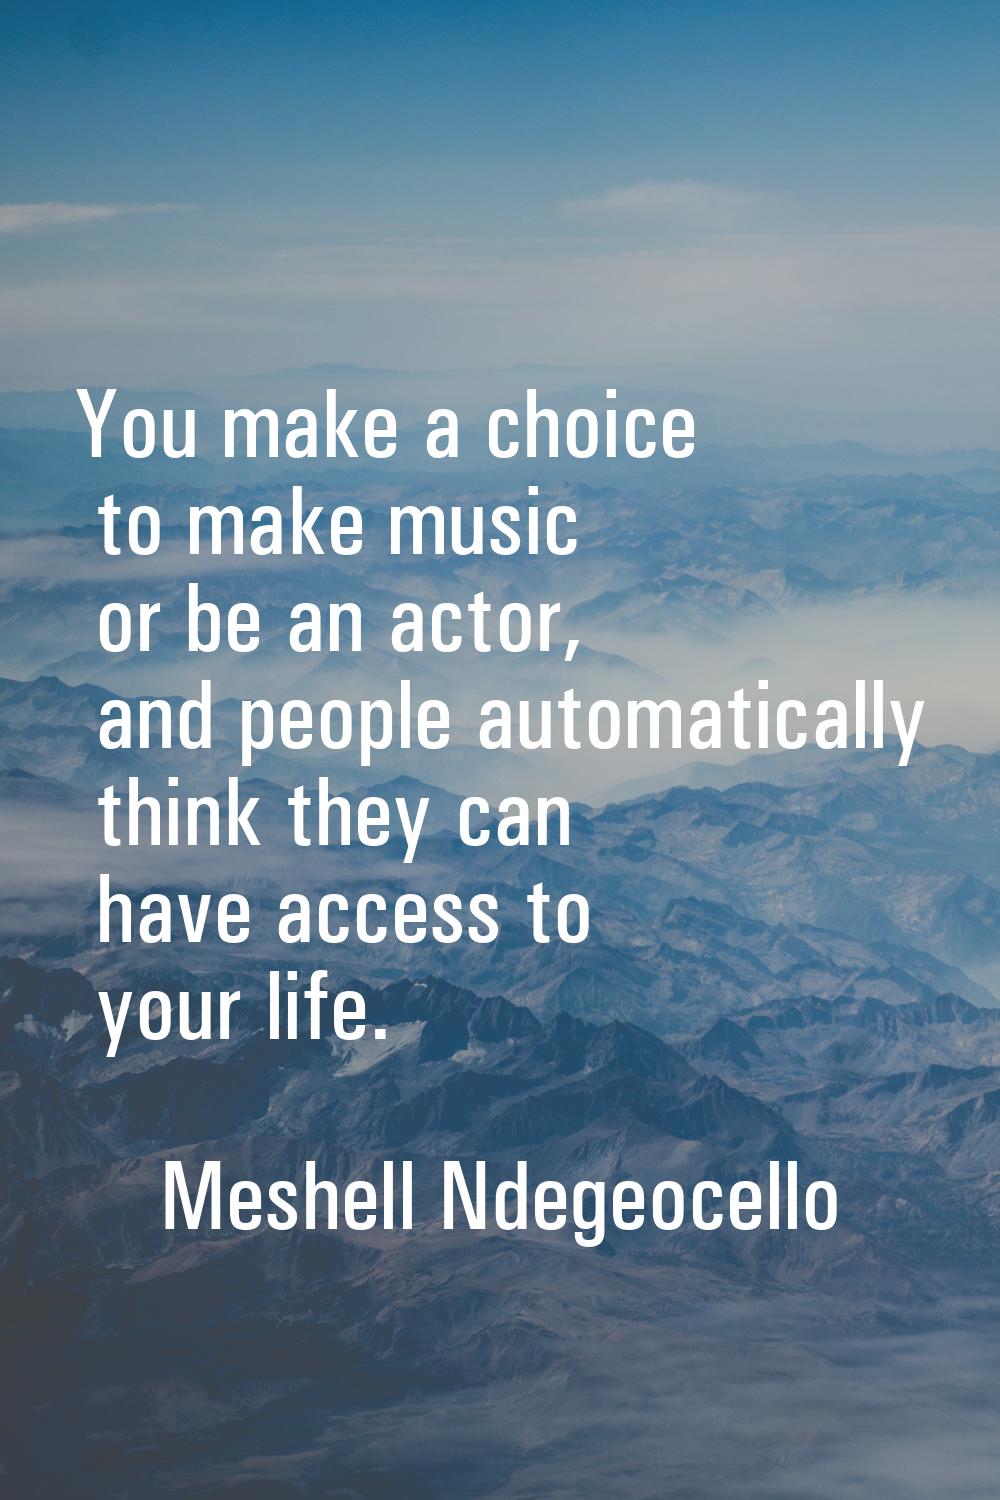 You make a choice to make music or be an actor, and people automatically think they can have access